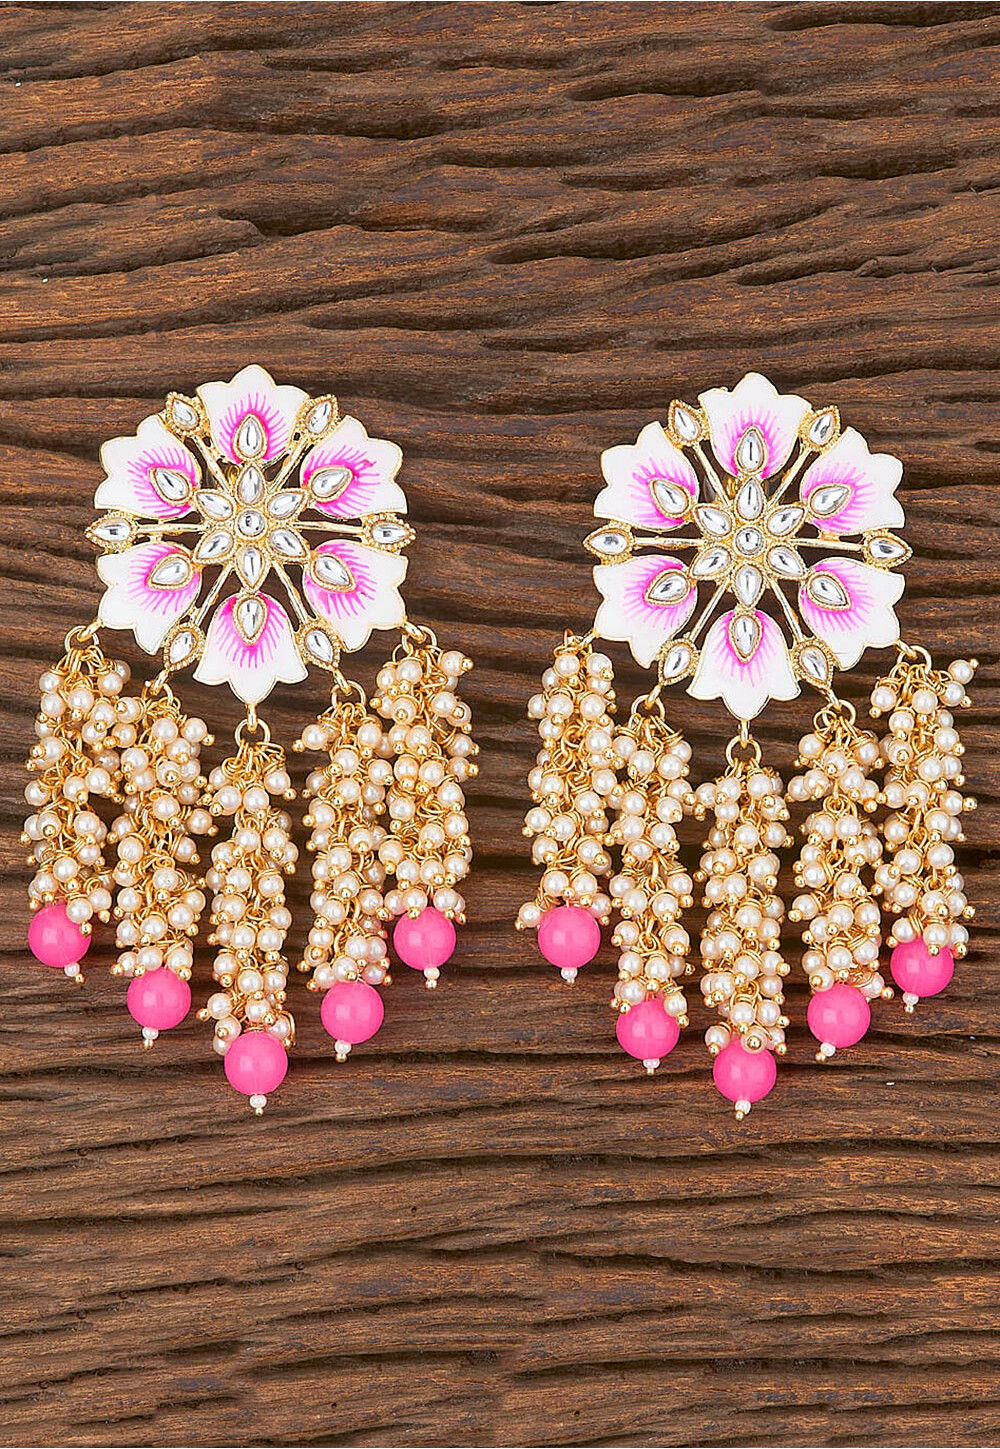 Meenakari Jewellery - Pakistani Pink Pearl Kundan Earrings Set Bollywood  Gold Plated Wedding Jewelry for just $26.99. Order here  https://tinyurl.com/y3x2gbpx #pearl #Necklace #EarringJewelry #Bridal  #Circle #Pink #Kundan #Women #Gold | Facebook